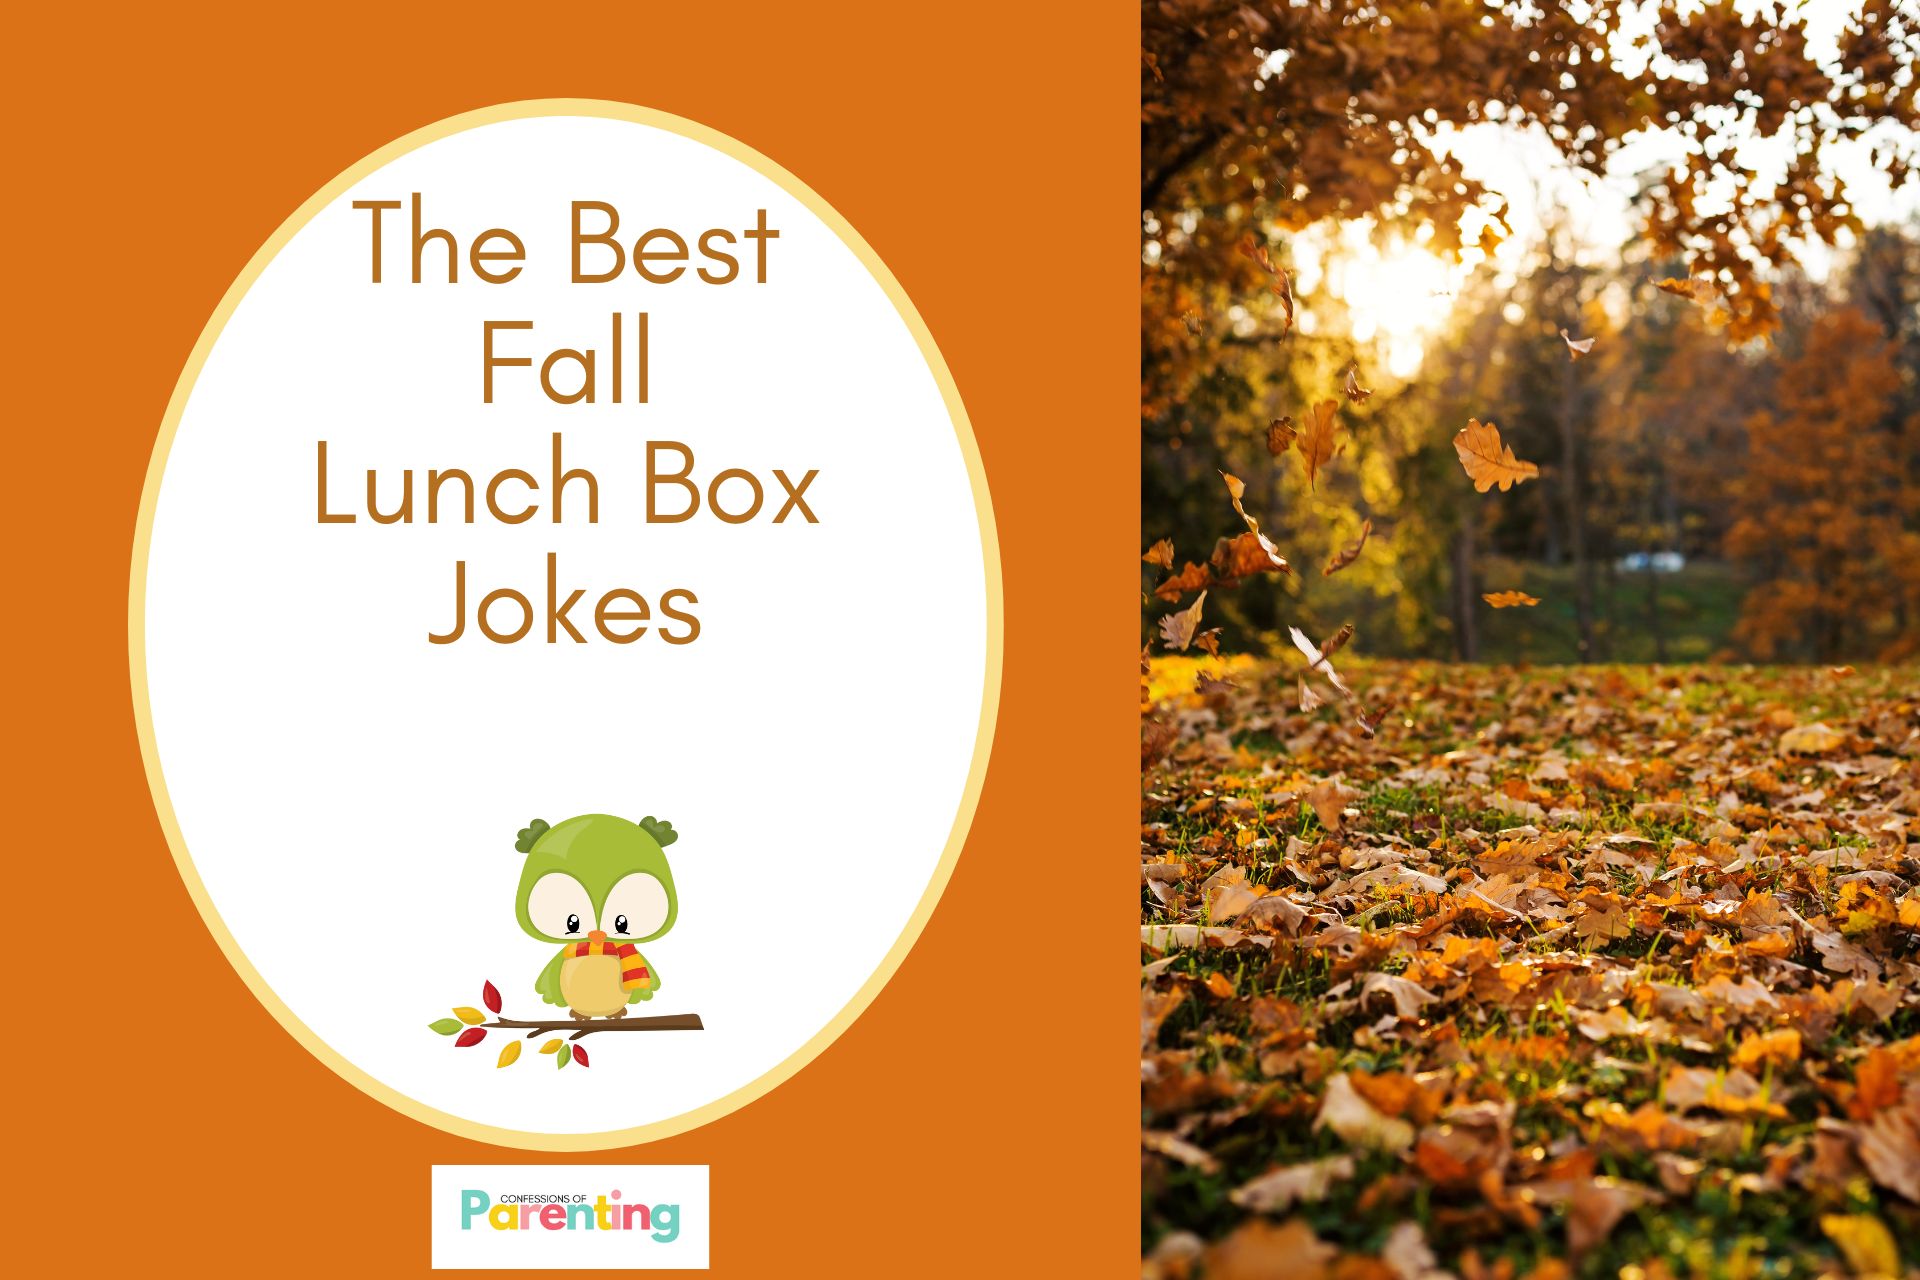 dry leaves on grass on half the image with a orange background on the left with a white oval with yellow border with a image of green owl on a branch and brown writing "the best fall lunch box jokes"